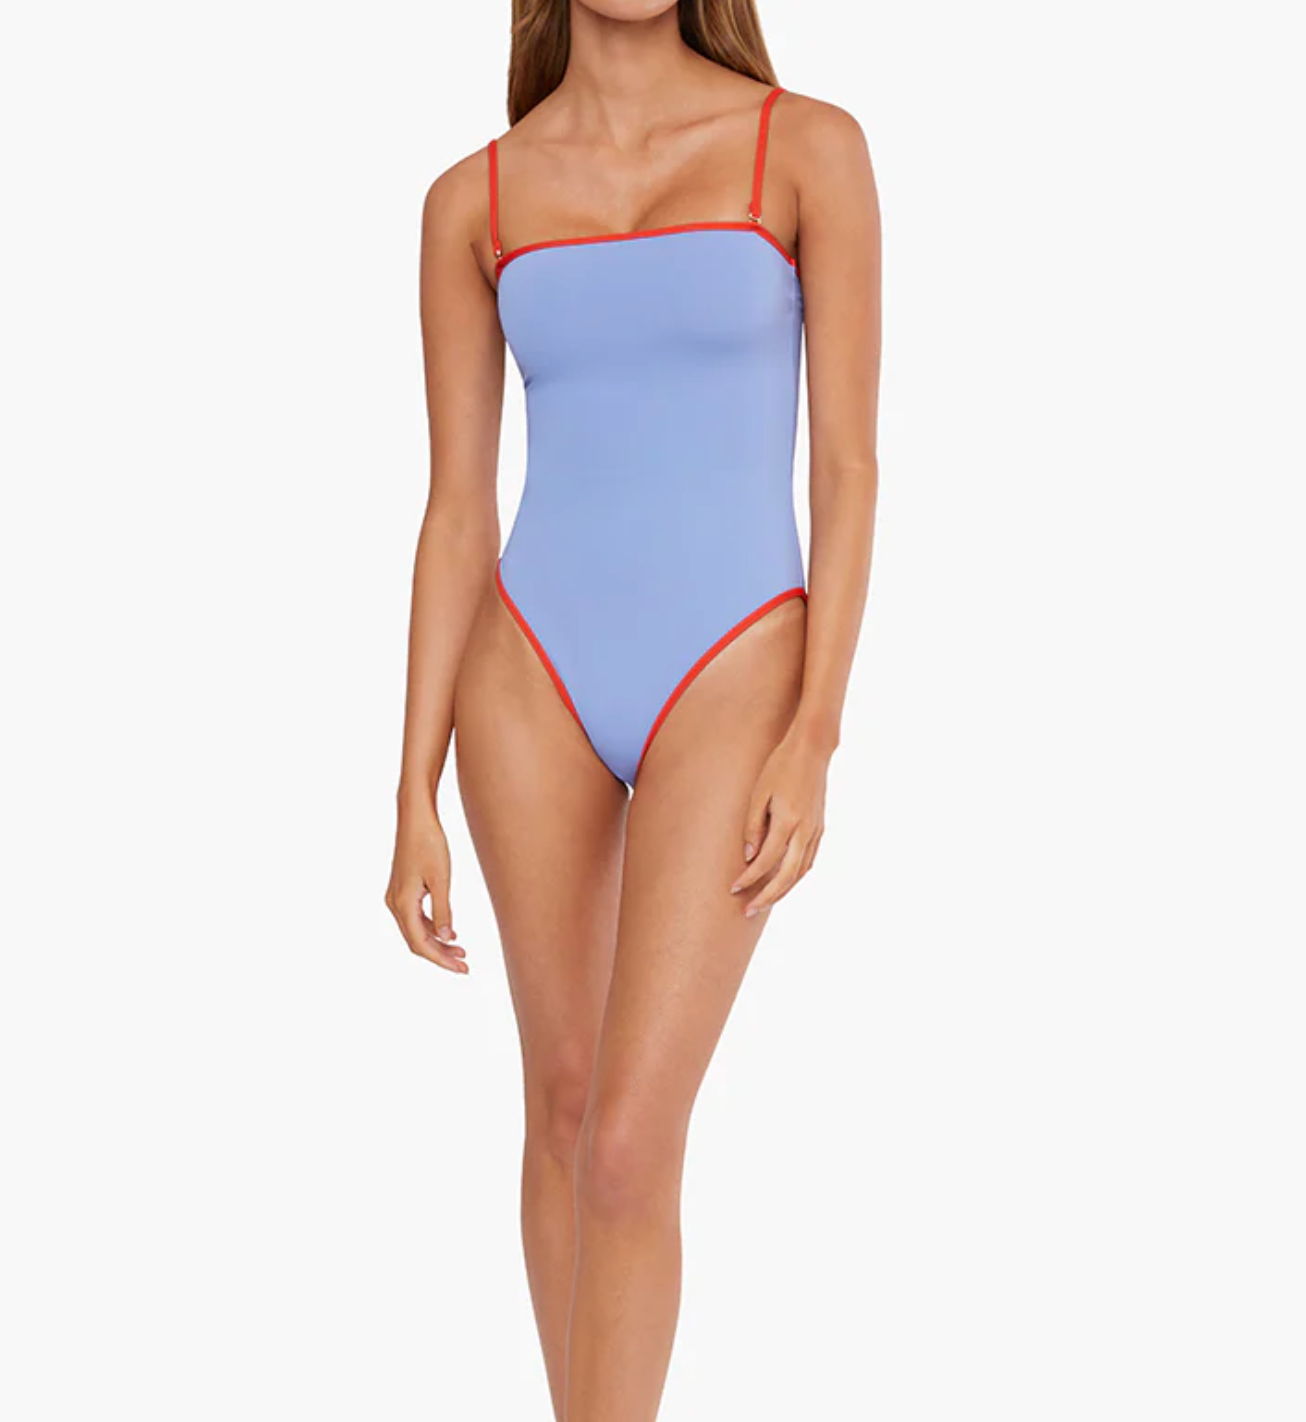 One Piece Blue/Red Swimsuit - We Wore What